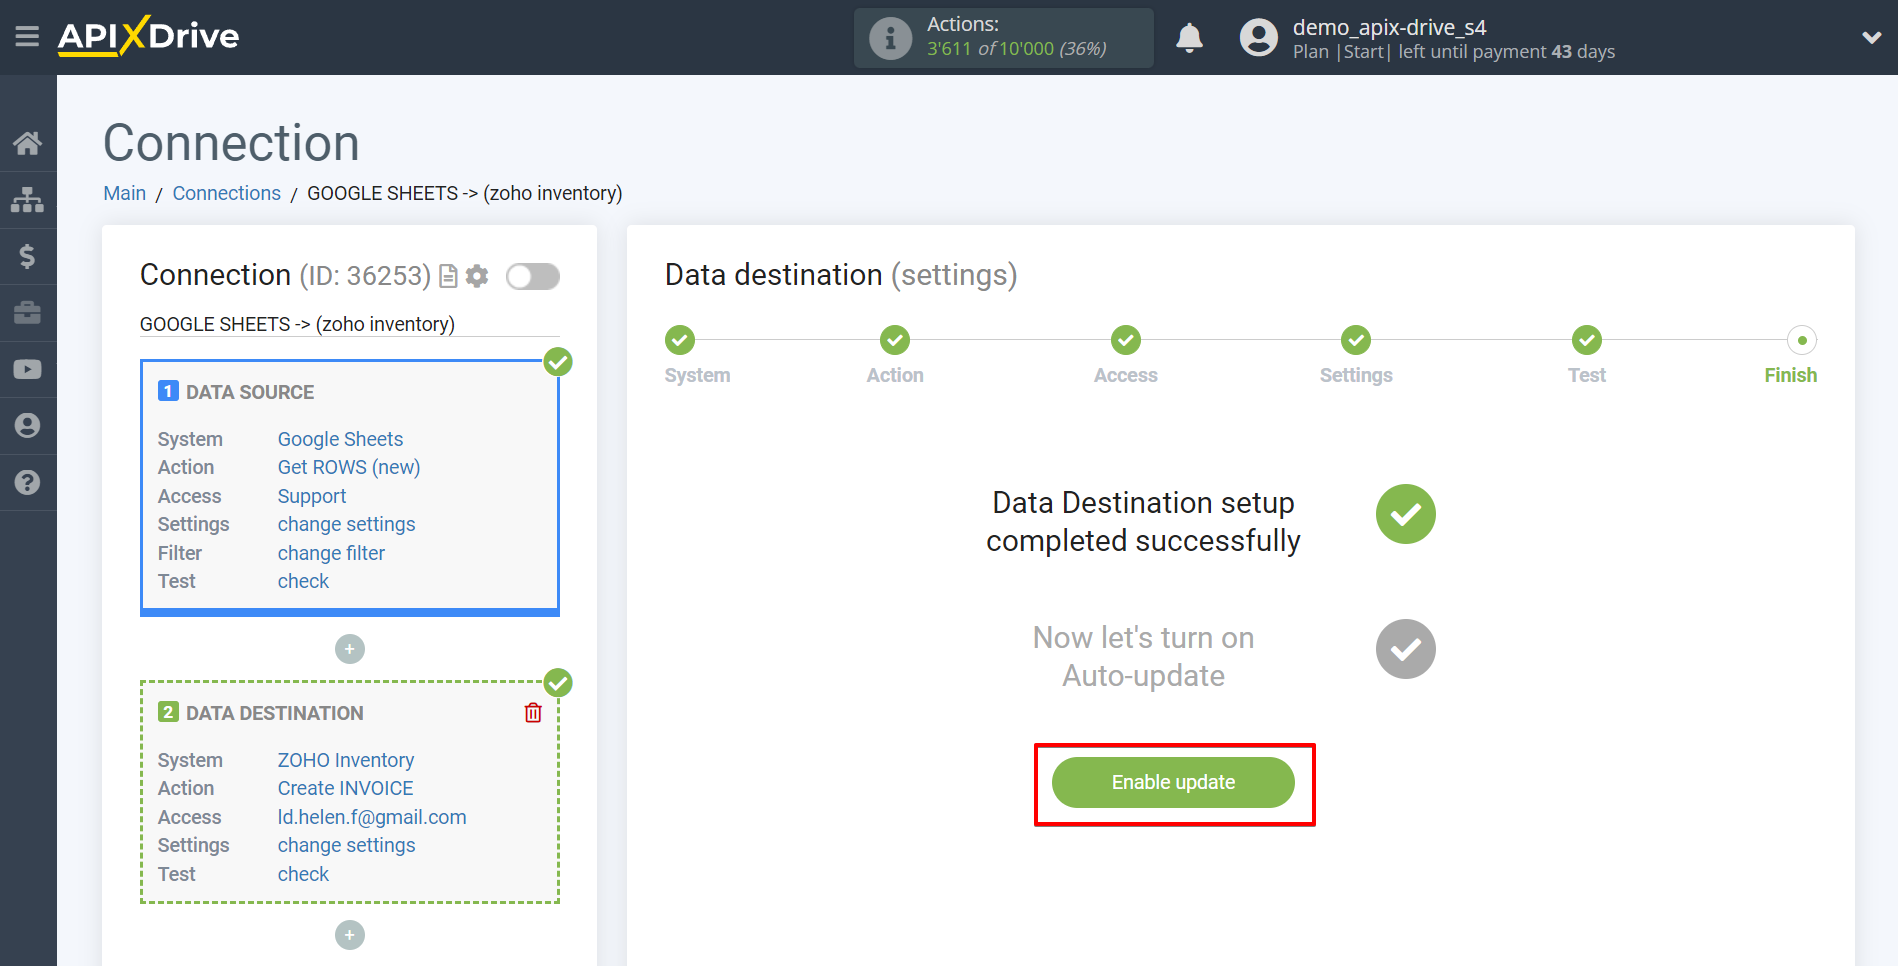 How to Connect Zoho Inventory as Data Destination | Enable auto-update